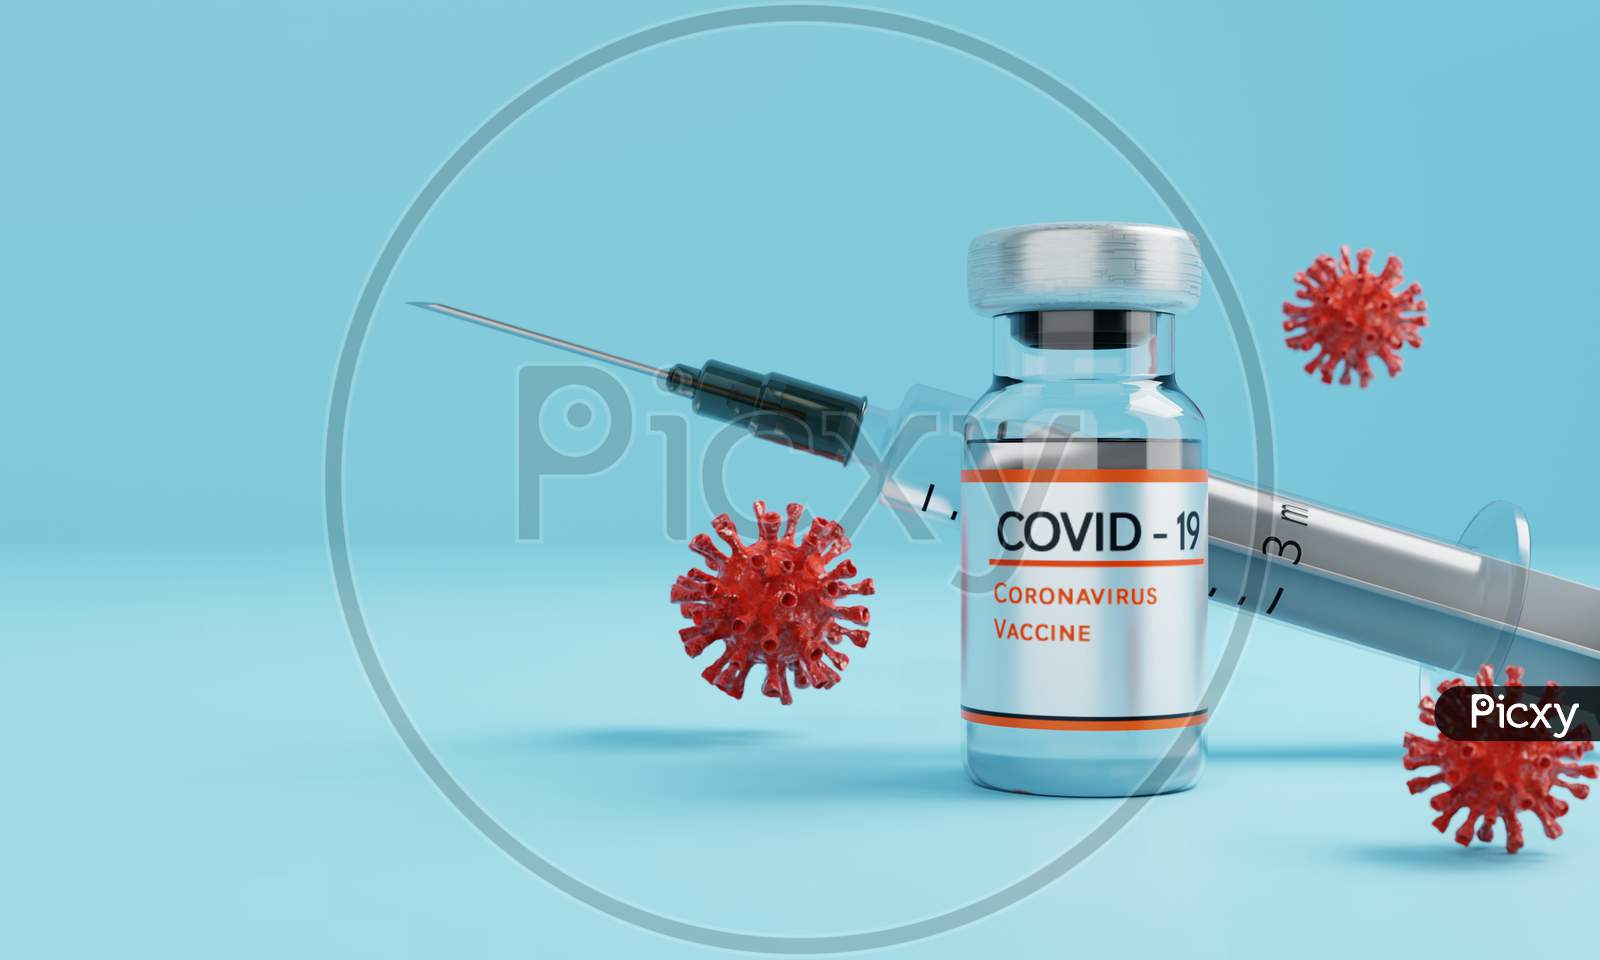 Coronavirus Vaccine Bottle With Injection Syringe And Virus On Blue Background. Health And Medical Concept. 3D Illustration Rendering Graphic Design